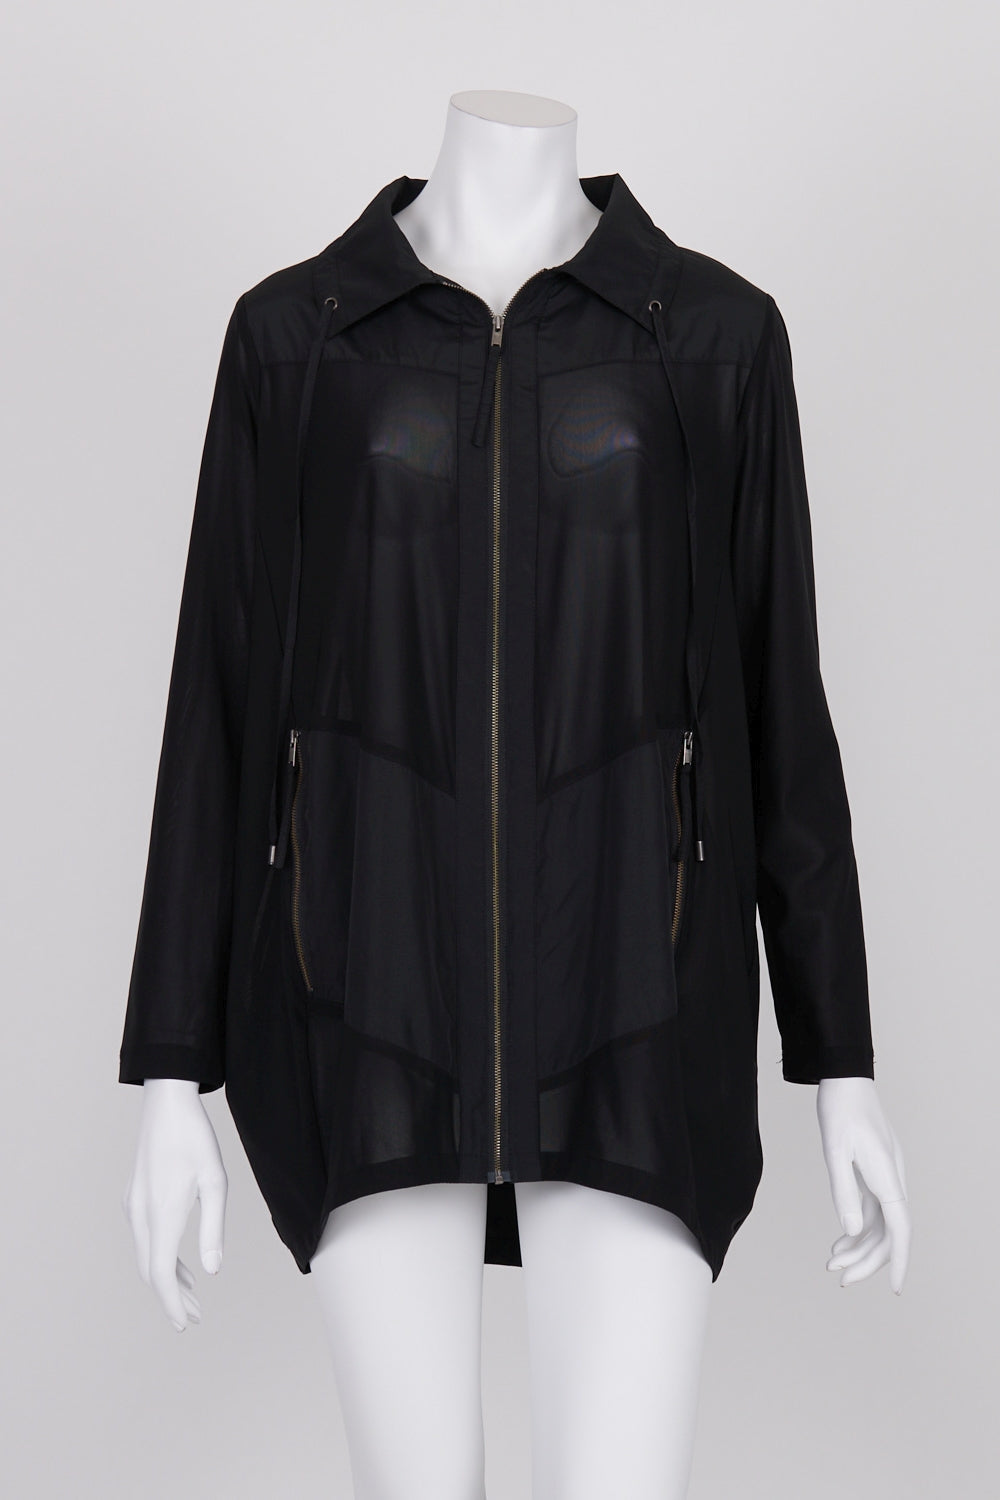 Marco Polo Black Zip Front Jacket 10